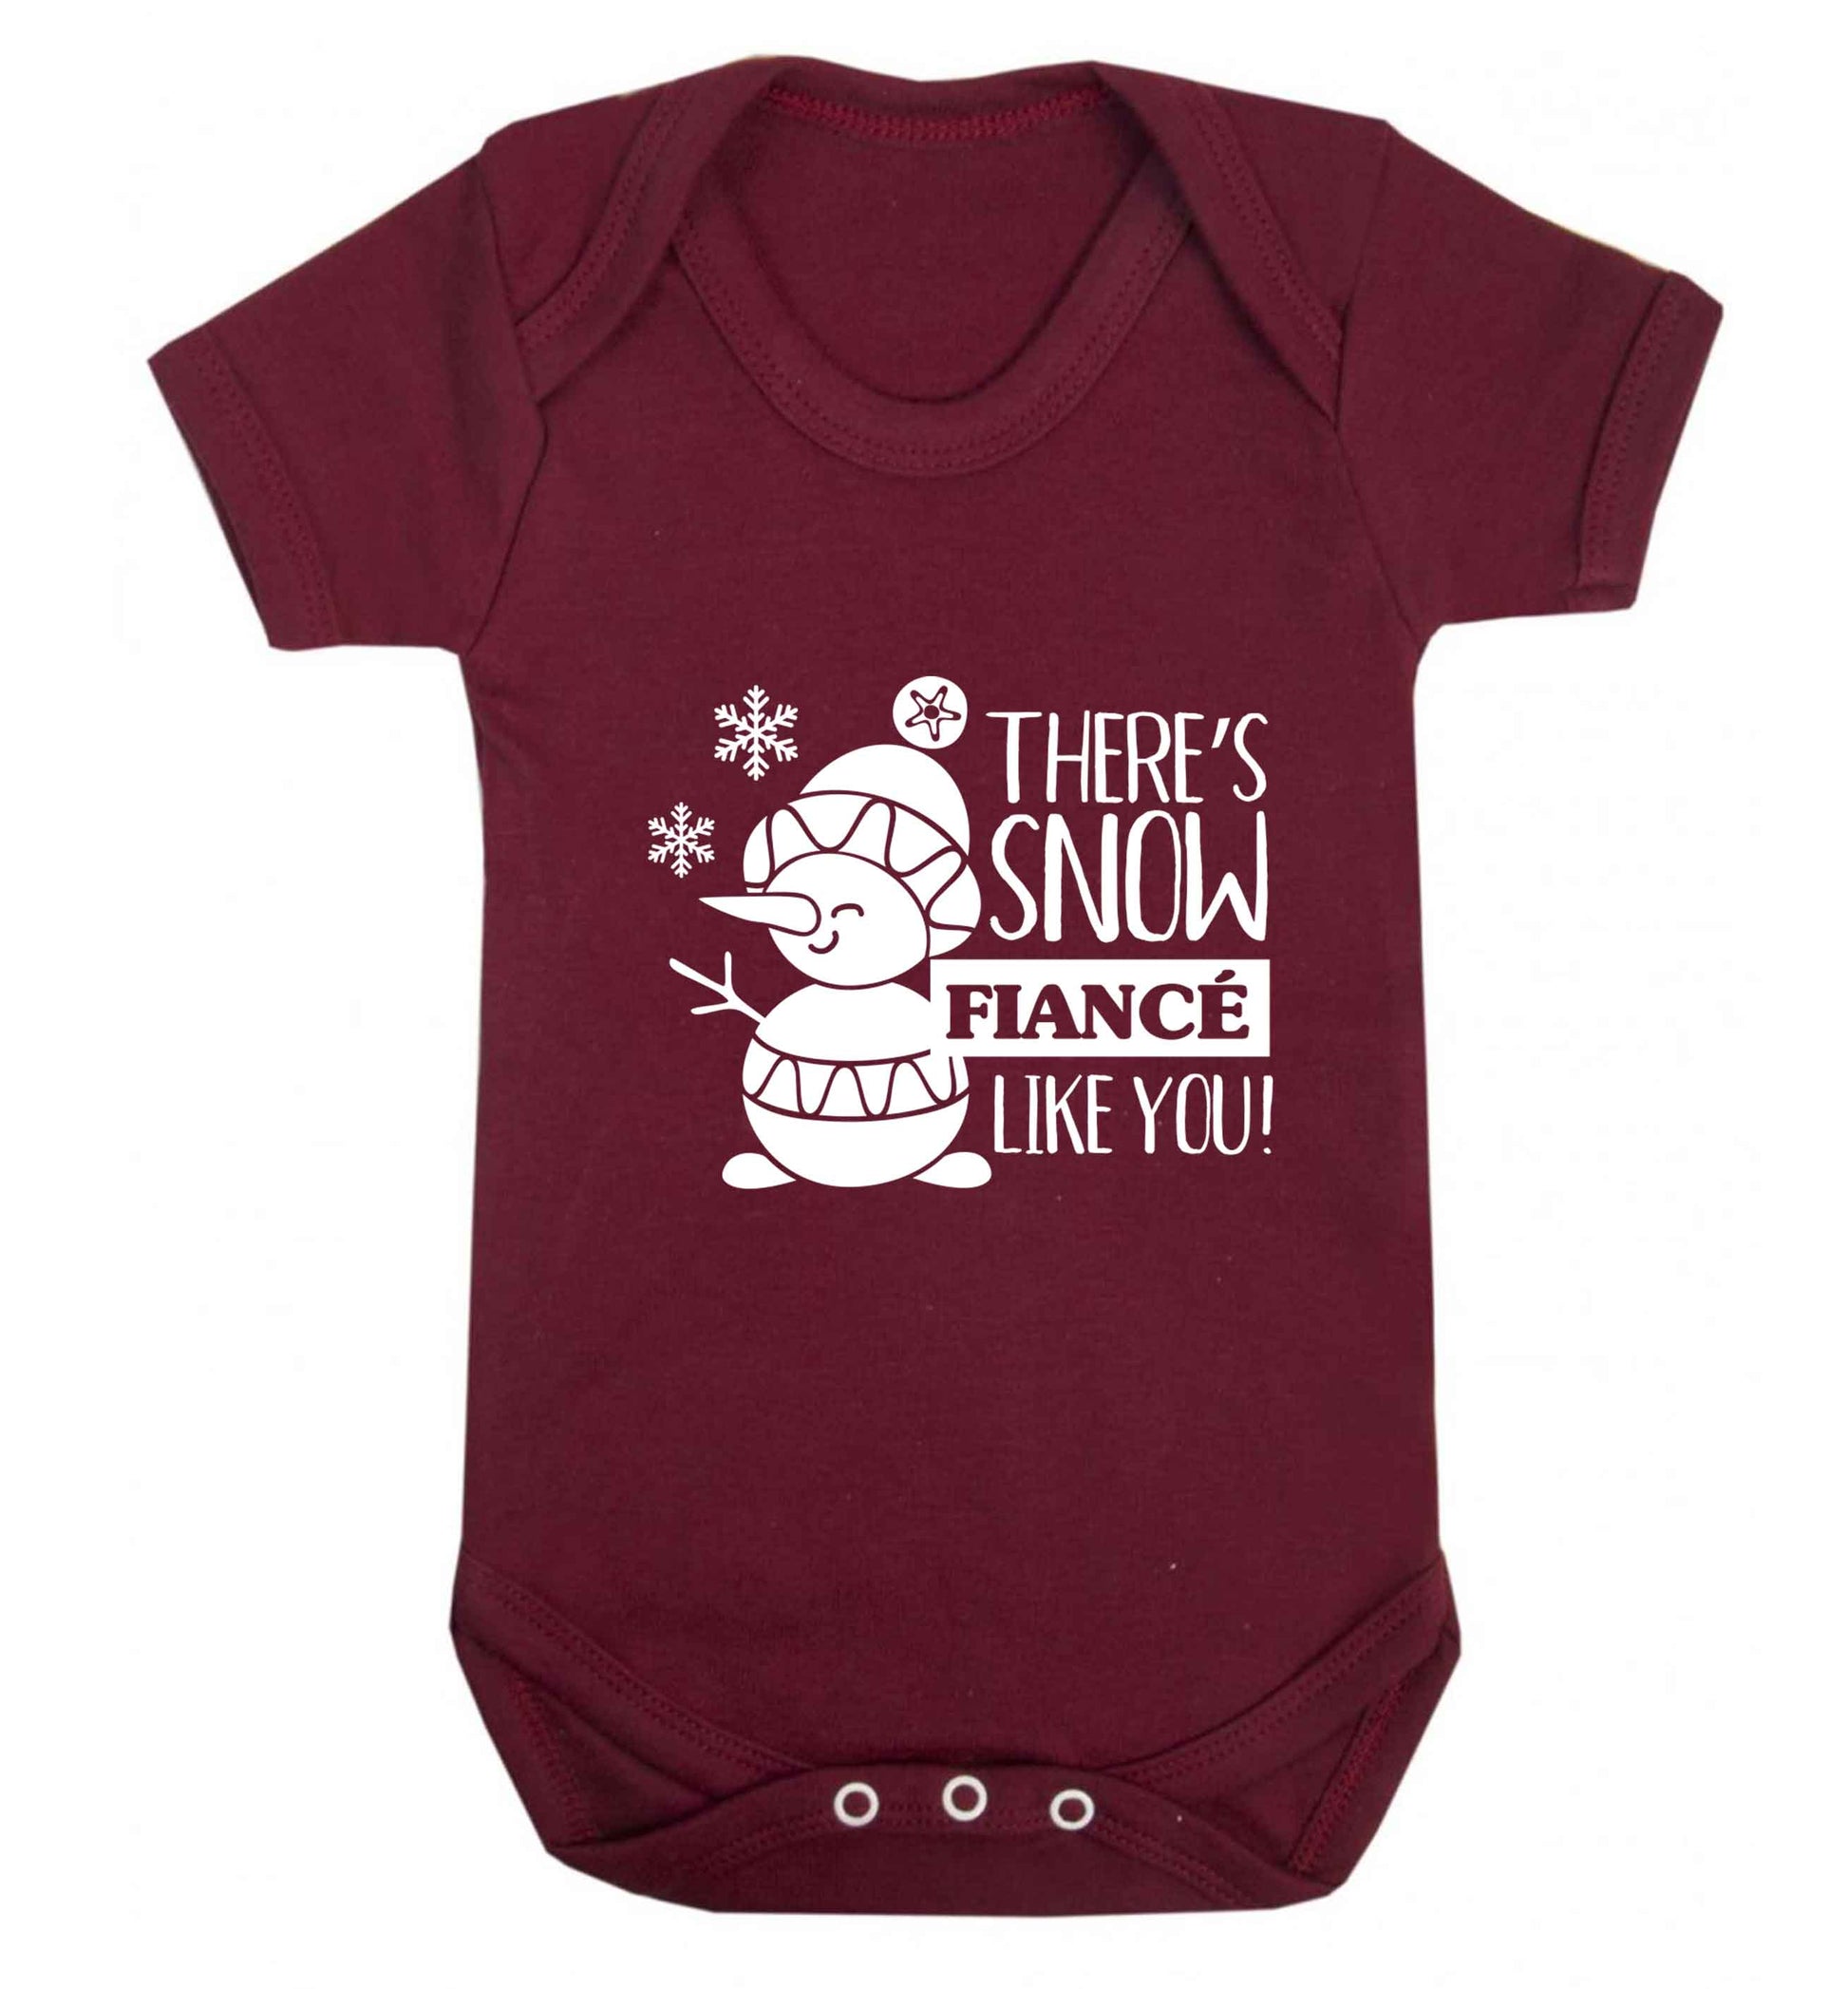 There's snow fiance like you baby vest maroon 18-24 months